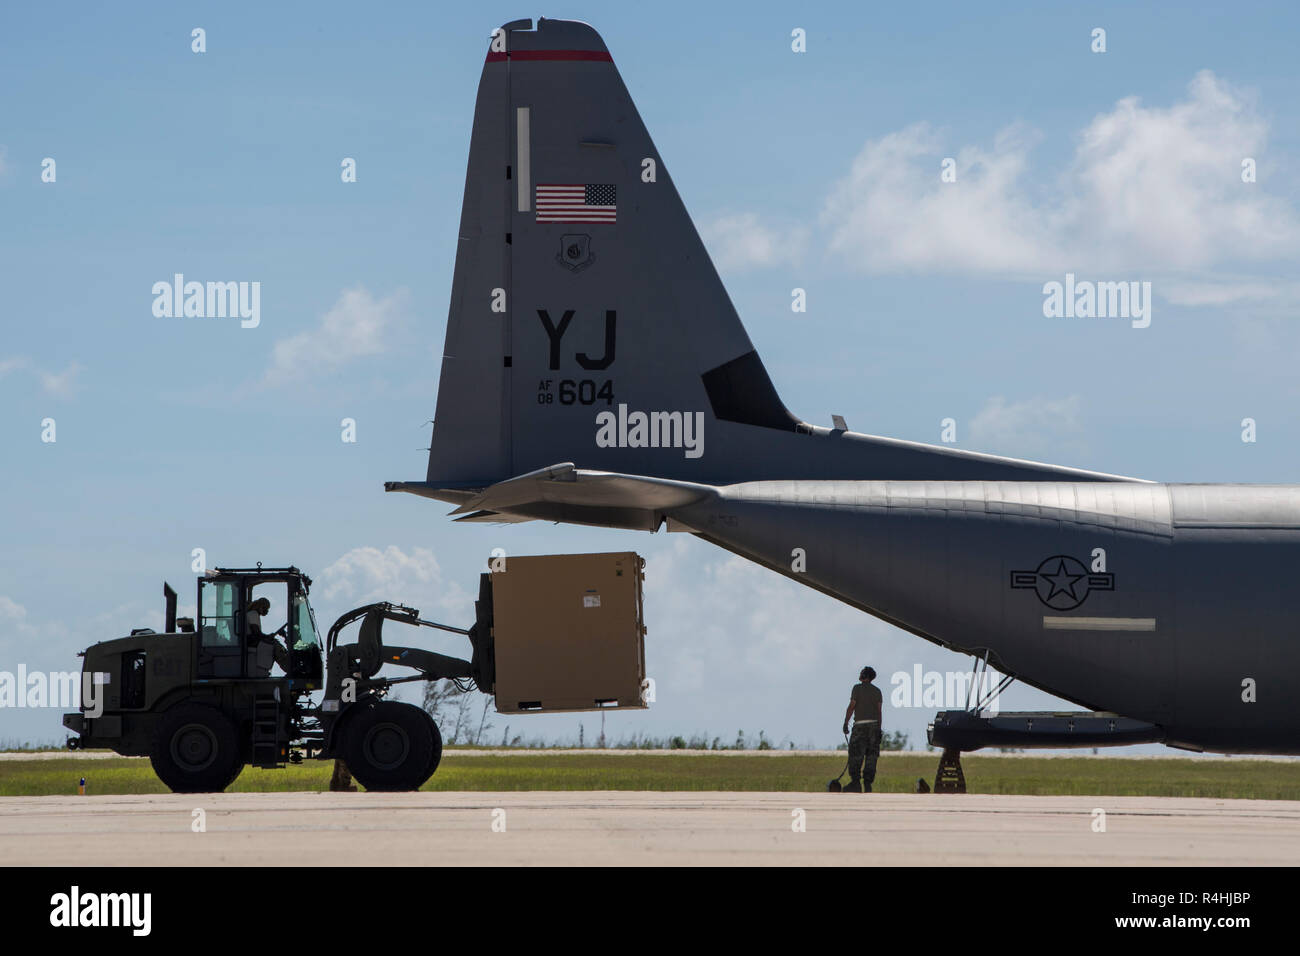 Cargo is loaded onto a C-130J Super Hercules, Nov. 27, 2018, at the Saipan International Airport, Saipan, Commonwealth of the Northern Mariana Islands. Service members from Joint Region Marianas and U.S. Indo-Pacific Command are providing Department of Defense support to the CNMI's civil and local officials as part of the Federal Emergency Management Agency-supported Super Typhoon Yutu recovery efforts. (U.S. Air Force Photo by Tech. Sgt. Joshua J. Garcia) Stock Photo